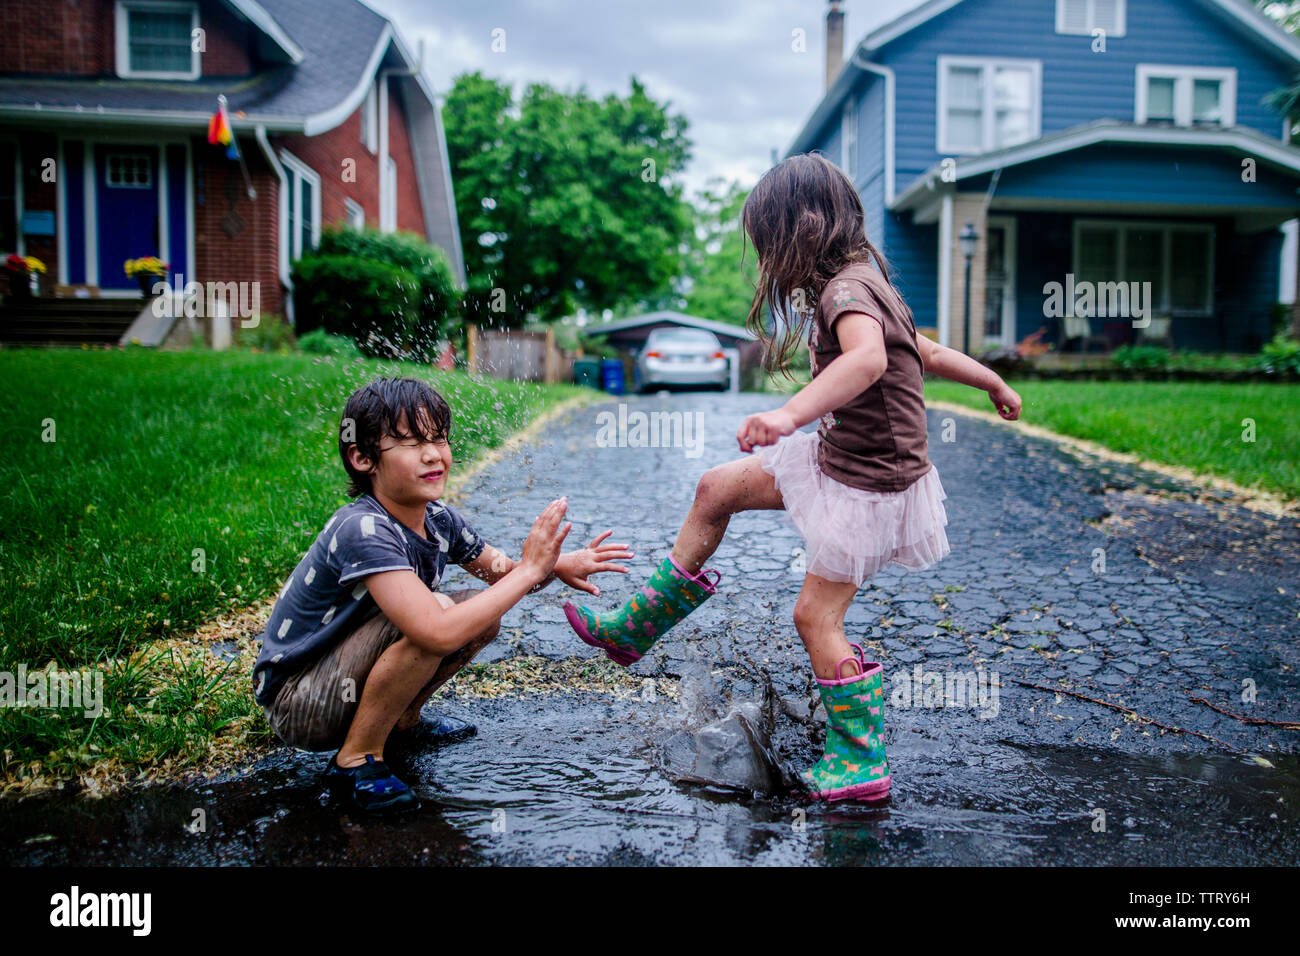 Side view of playful sister splashing puddle on brother during rainy season Stock Photo